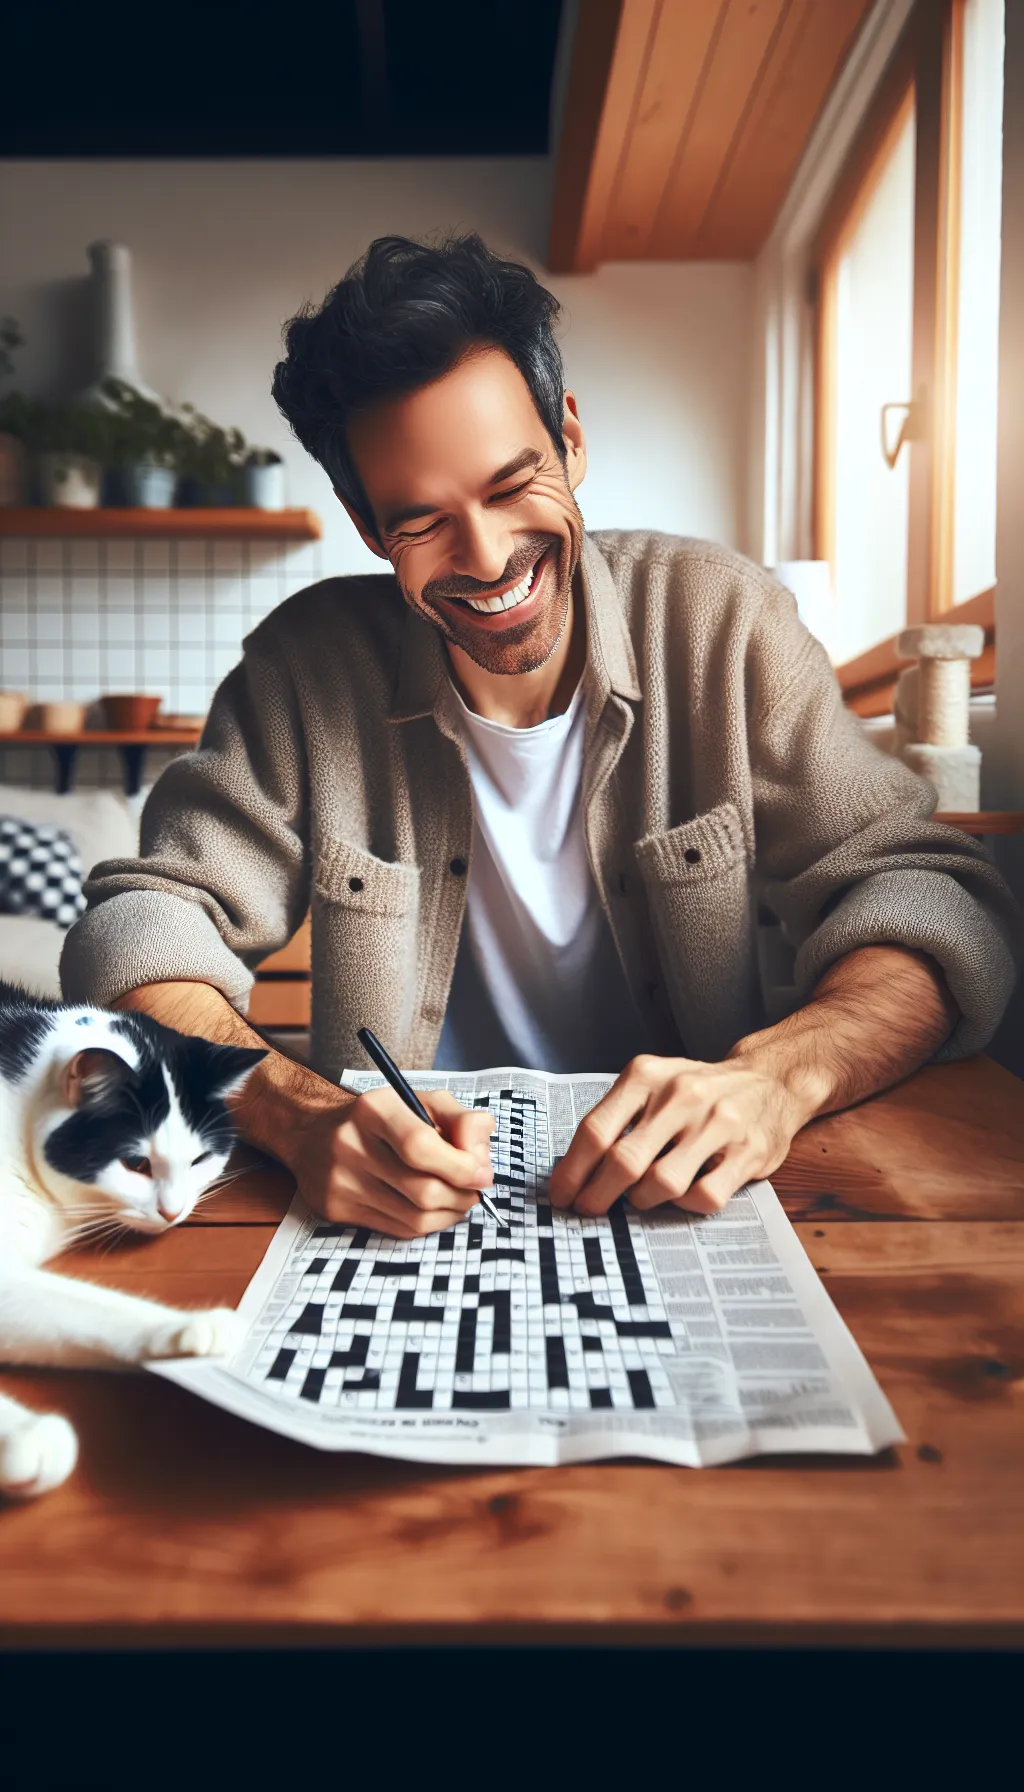 An image of a joyful Caucasian man engaged in solving a crossword puzzle at his home. He is comfortably seated at a table, deeply absorbed in his activity. Sharing the space with him is his faithful companion, a white and black cat, calmly resting next to him. The room around them exudes warmth and cosiness, reflecting a typical home setting.